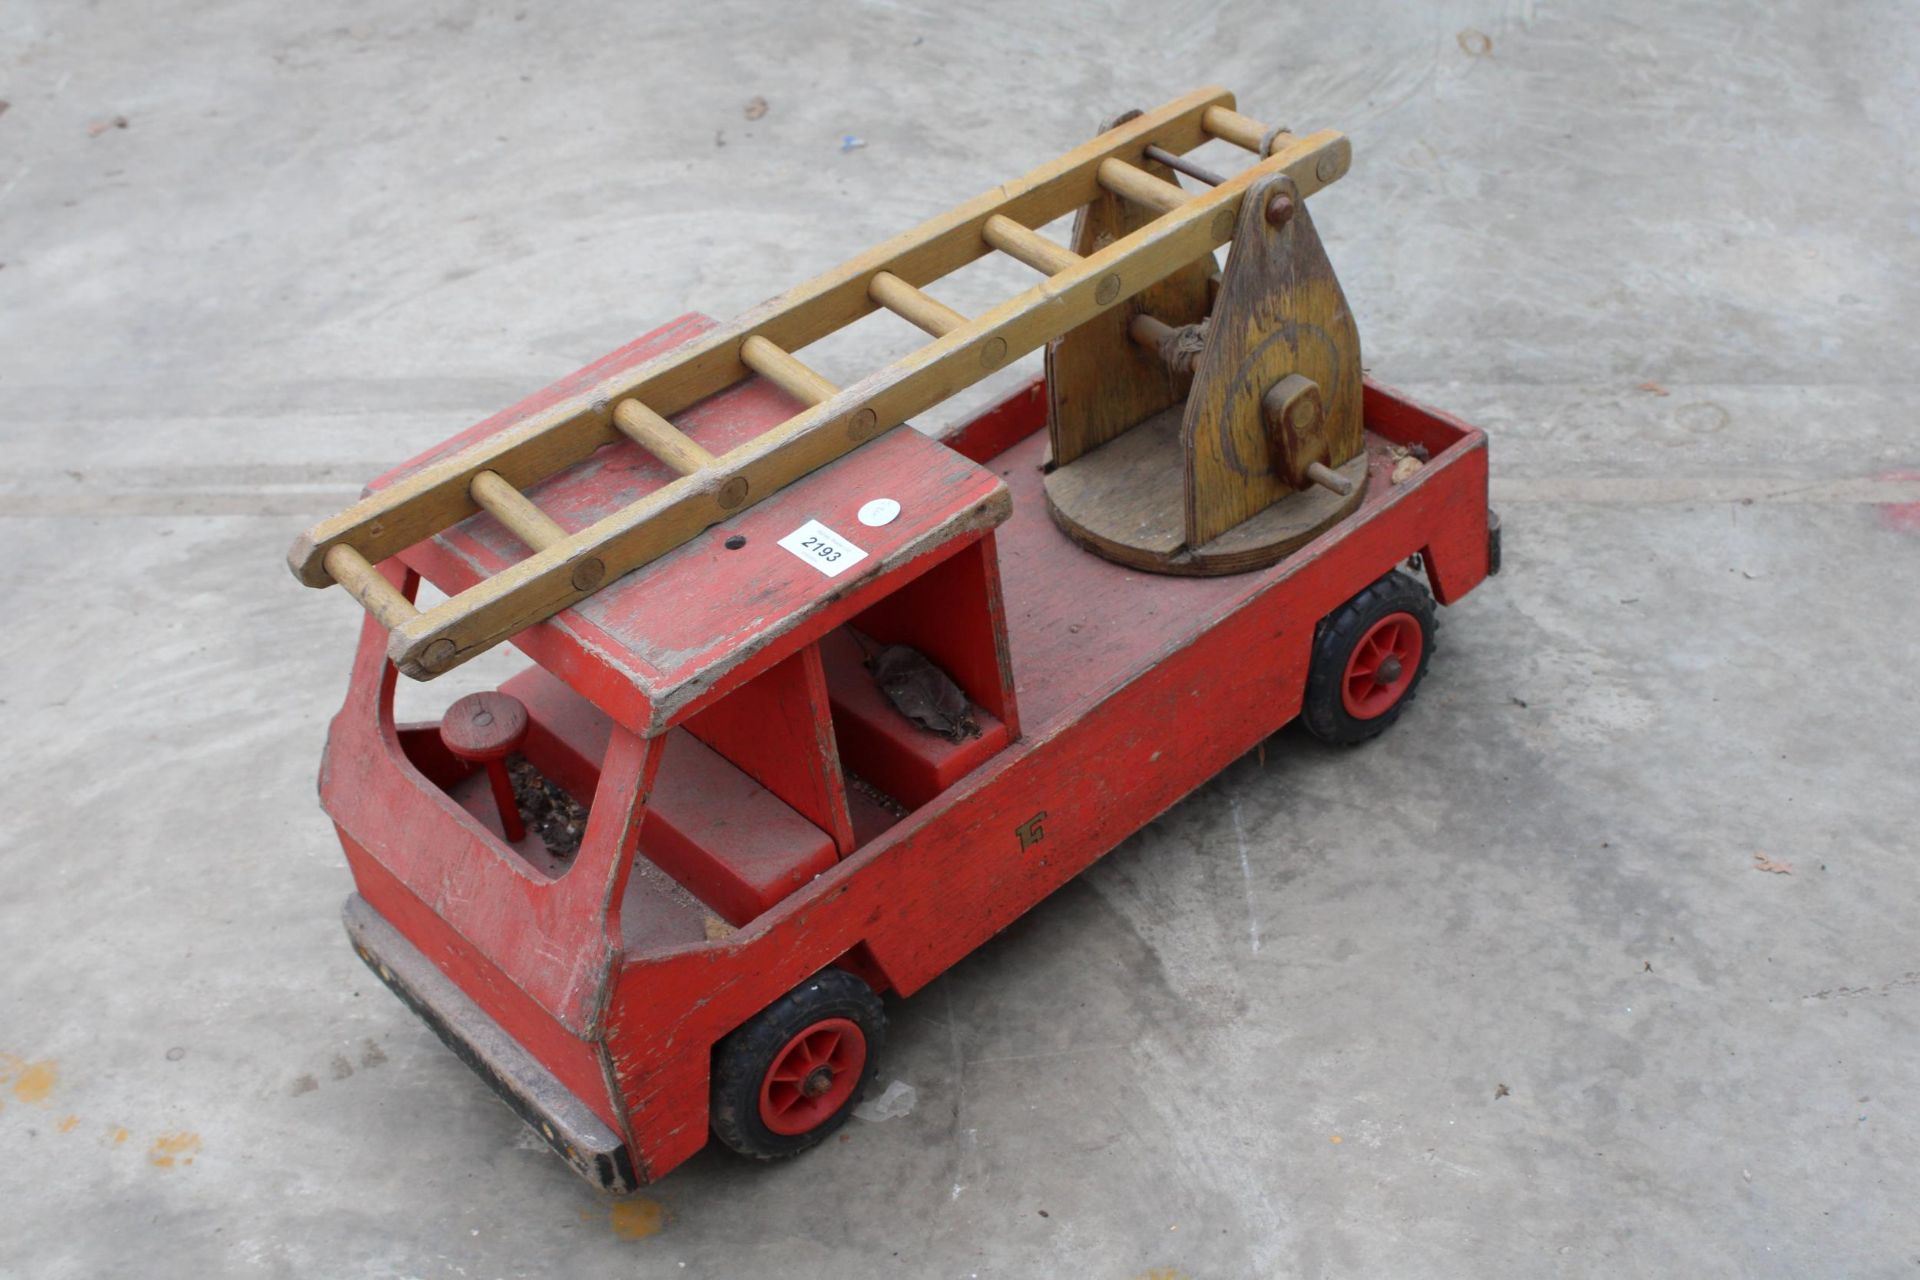 A LARGE WOODEN FIRE TRUCK